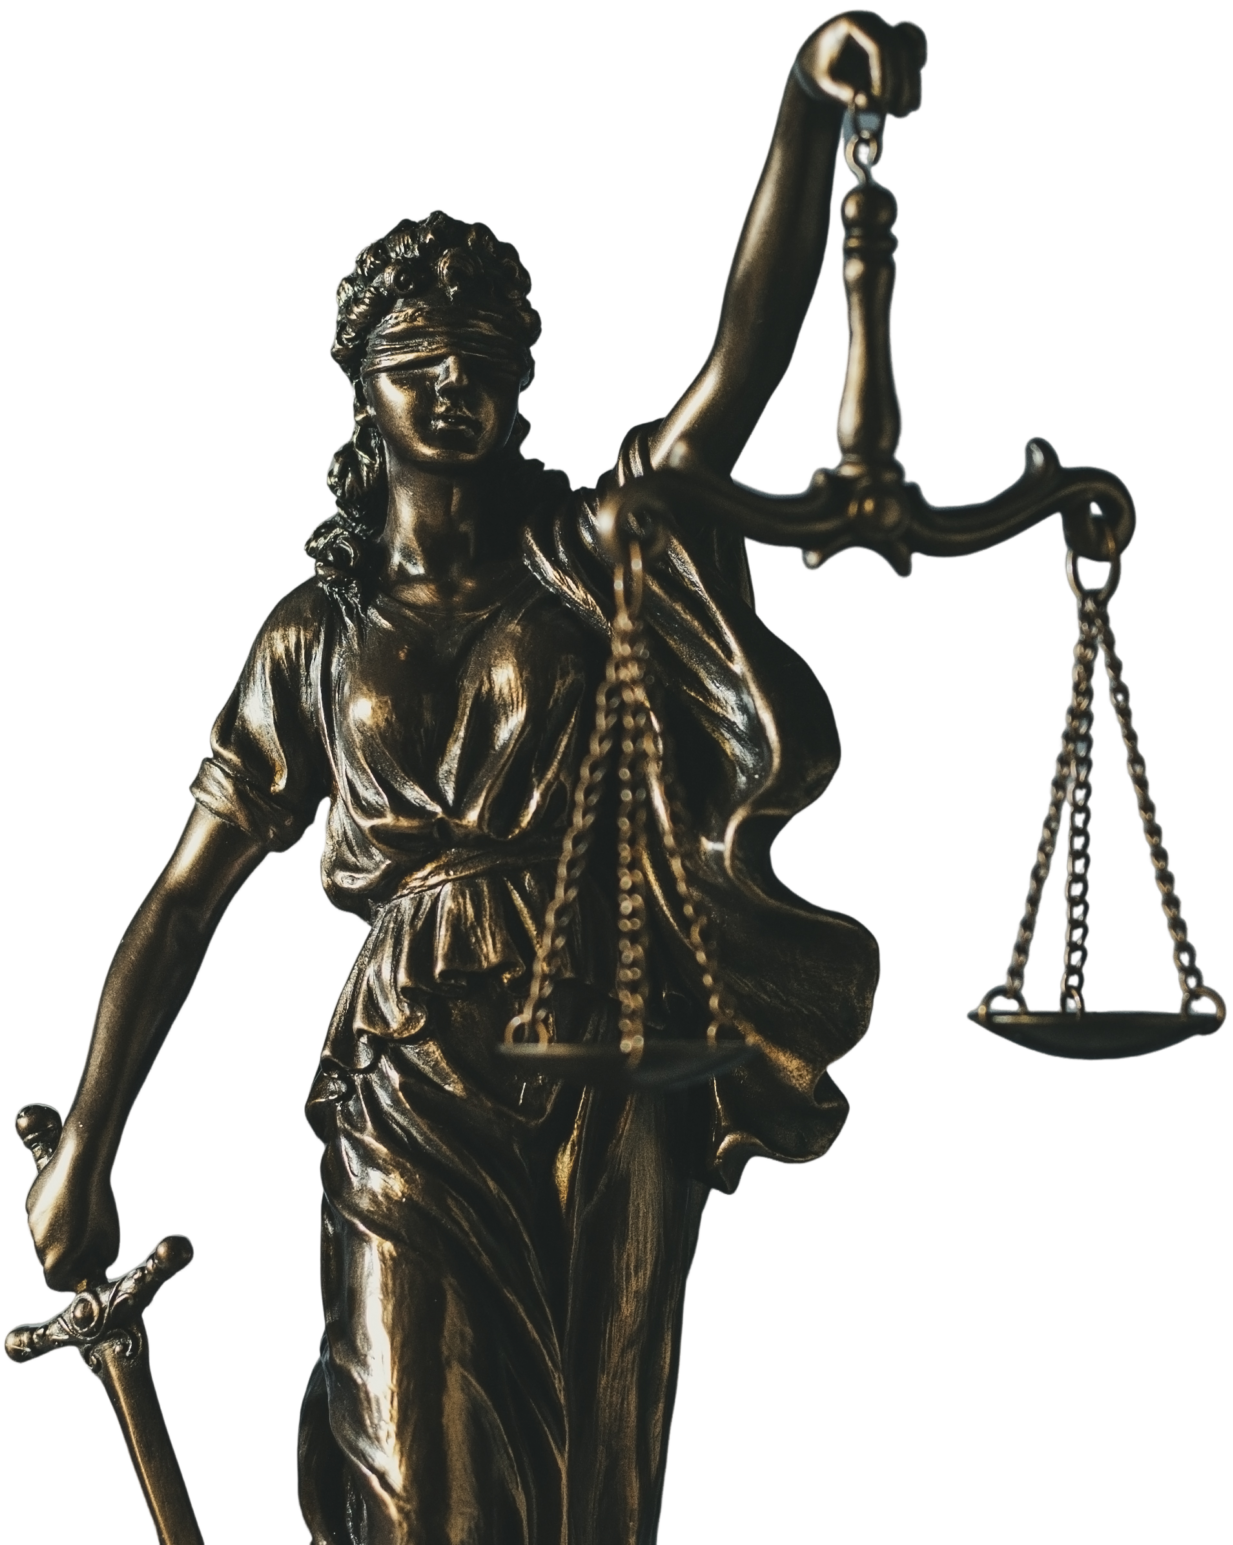 brass statue of justice holding scales and sword 2023 11 27 04 59 43 utc